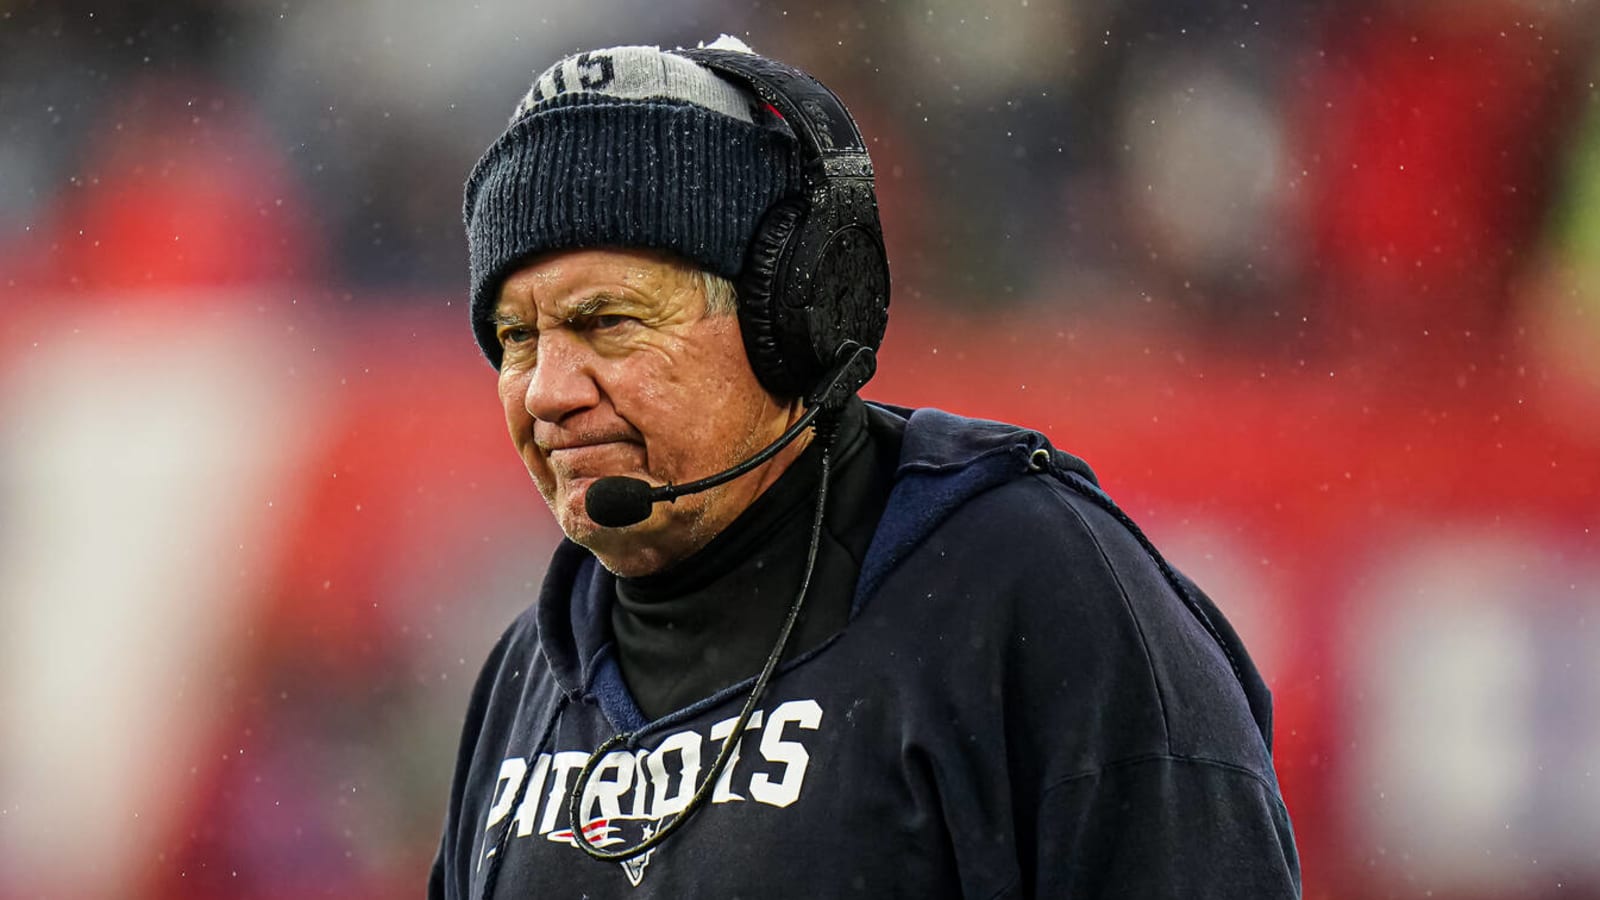 Patriots Pro Bowl feat yet another sign of Belichick decline